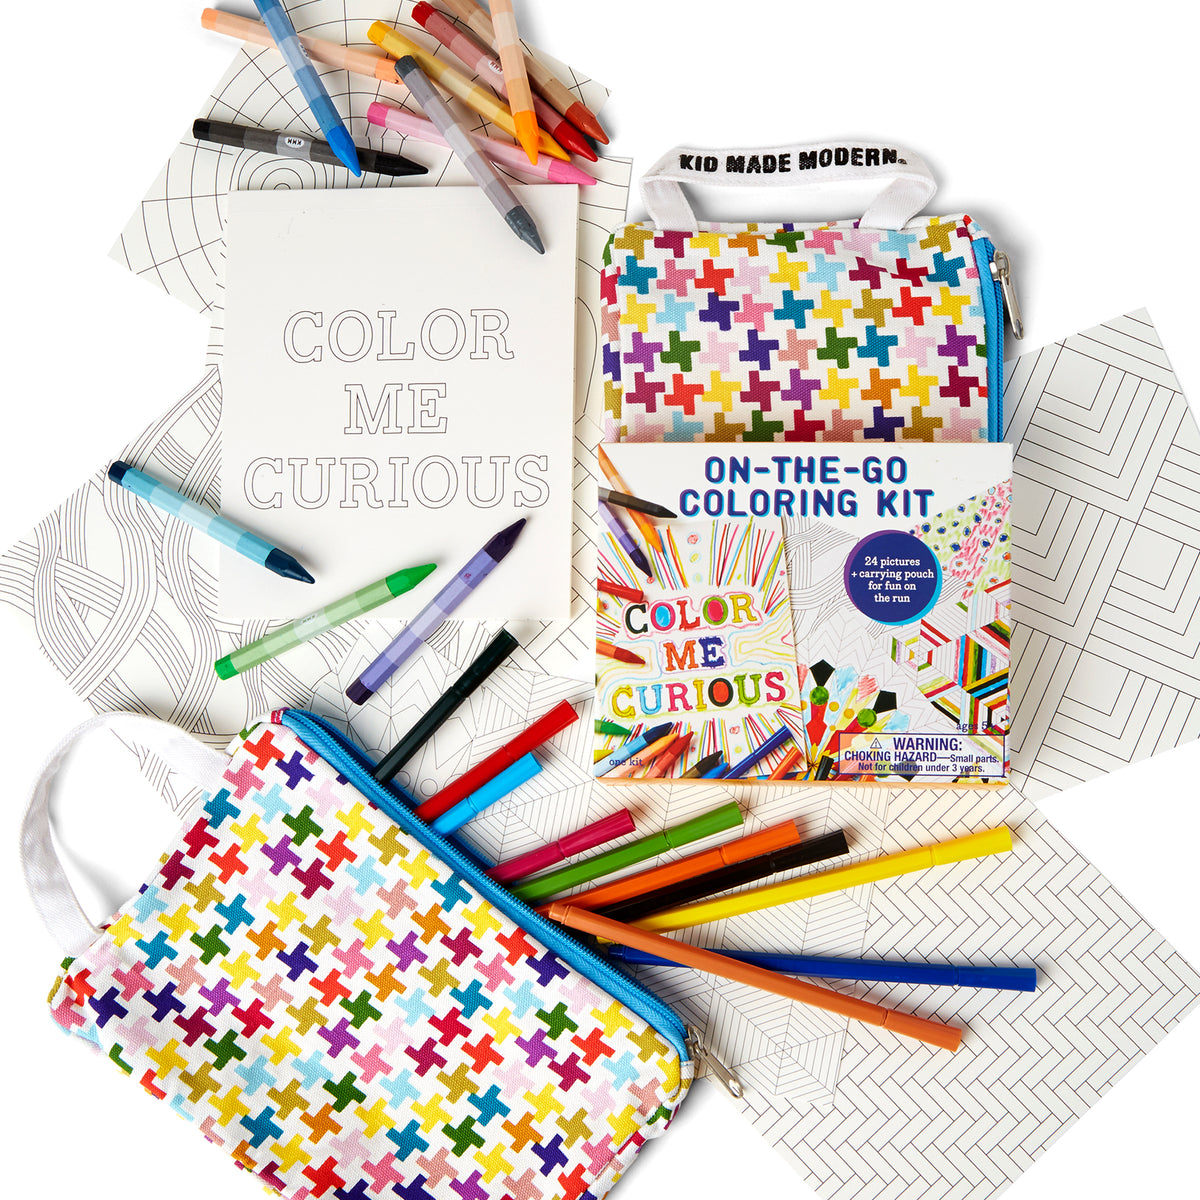 On-the-go Coloring Kit – Kid Made Modern